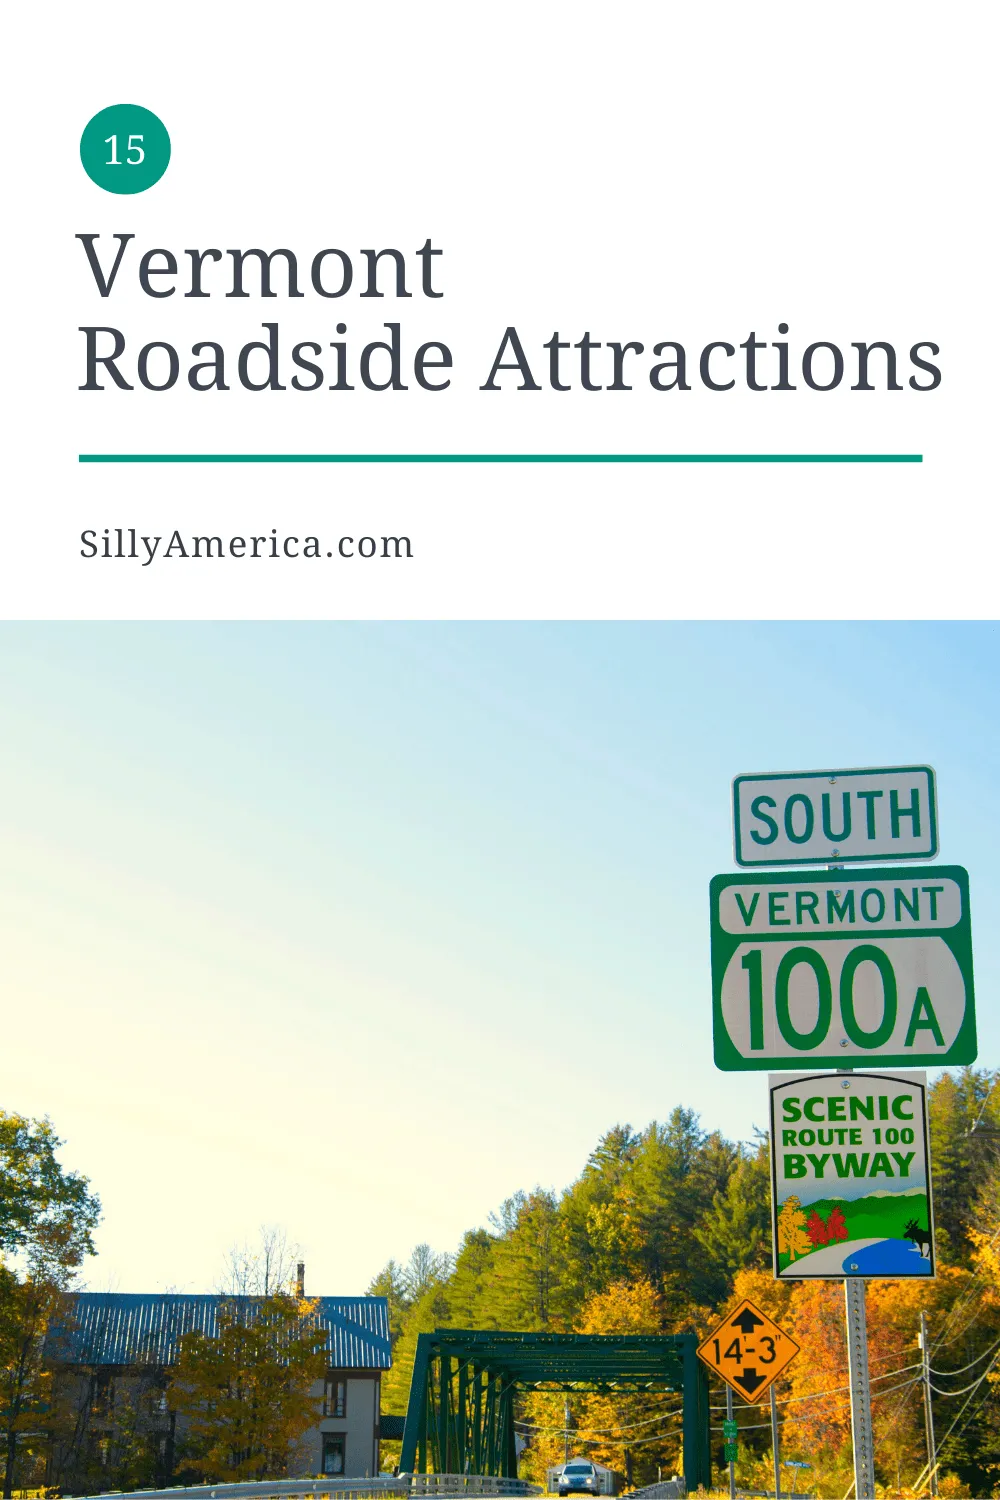 The best Vermont roadside attractions to visit on a Vermont road trip. Add these roadside oddities to your travel bucket list, itinerary, or route map! Weird roadside attractions and other road trip stops for kids or adults! #VermontRoadsideAttractions #VermontRoadsideAttraction #RoadsideAttractions #RoadsideAttraction #RoadTrip #VermontRoadTrip #VermontFallRoadTrip #VermontSummerRoadTrip #VermontWinterRoadTrip #WeirdRoadsideAttractions